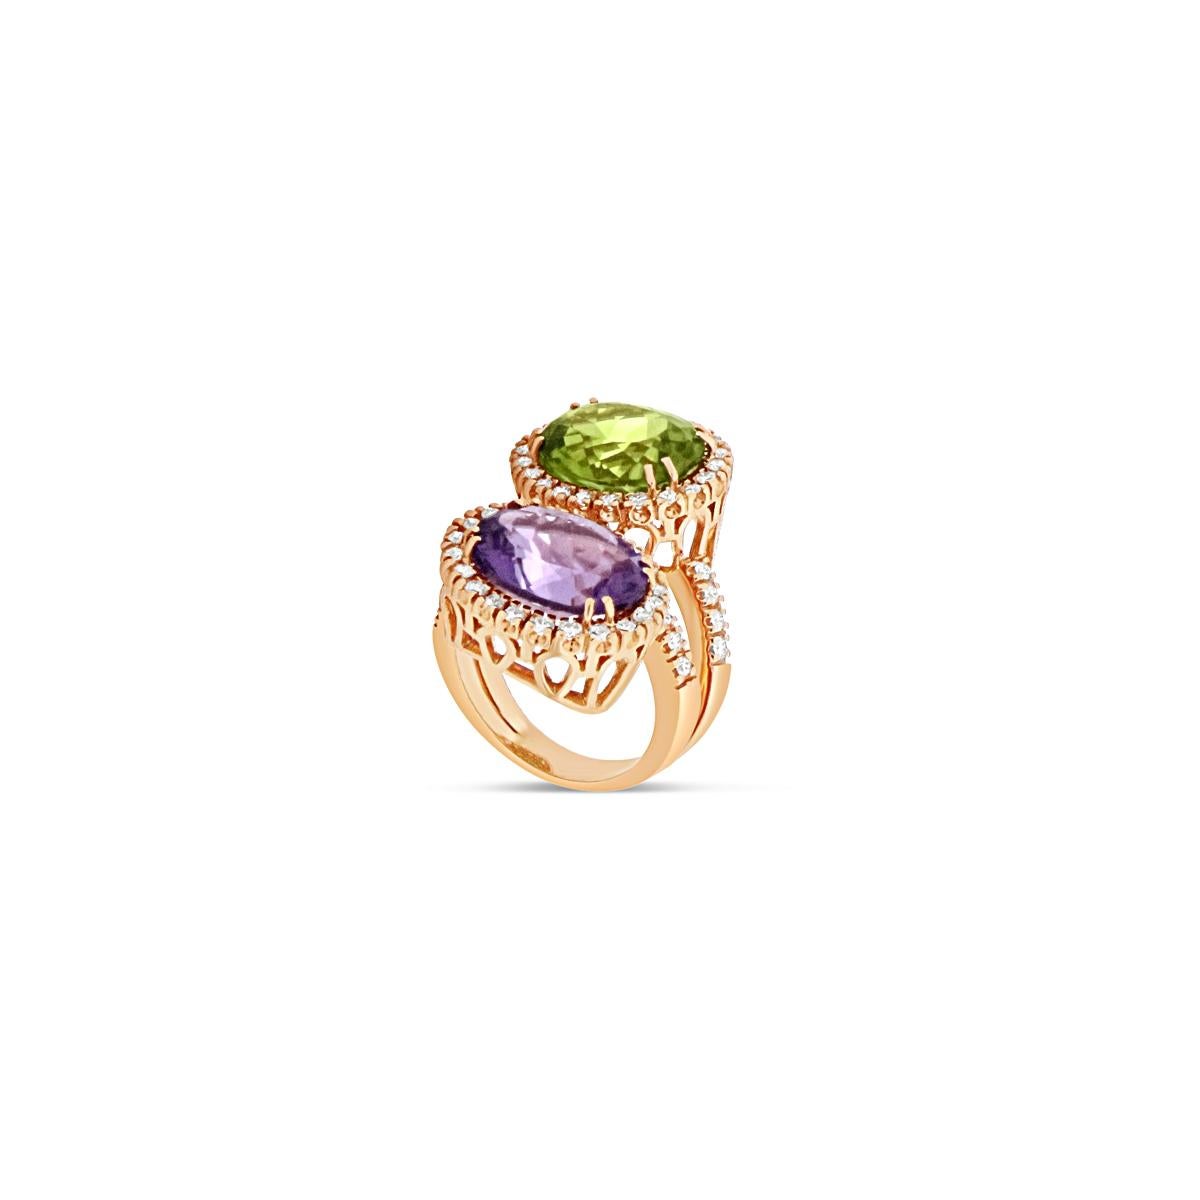 Looking for a luxurious cocktail ring that no one will forget? This pronounced, flamboyant piece is certainly a rare find. Made in Italy by a traditional, high-end designer, this large cocktail ring is truly a work of art.
The modern bypass ring is